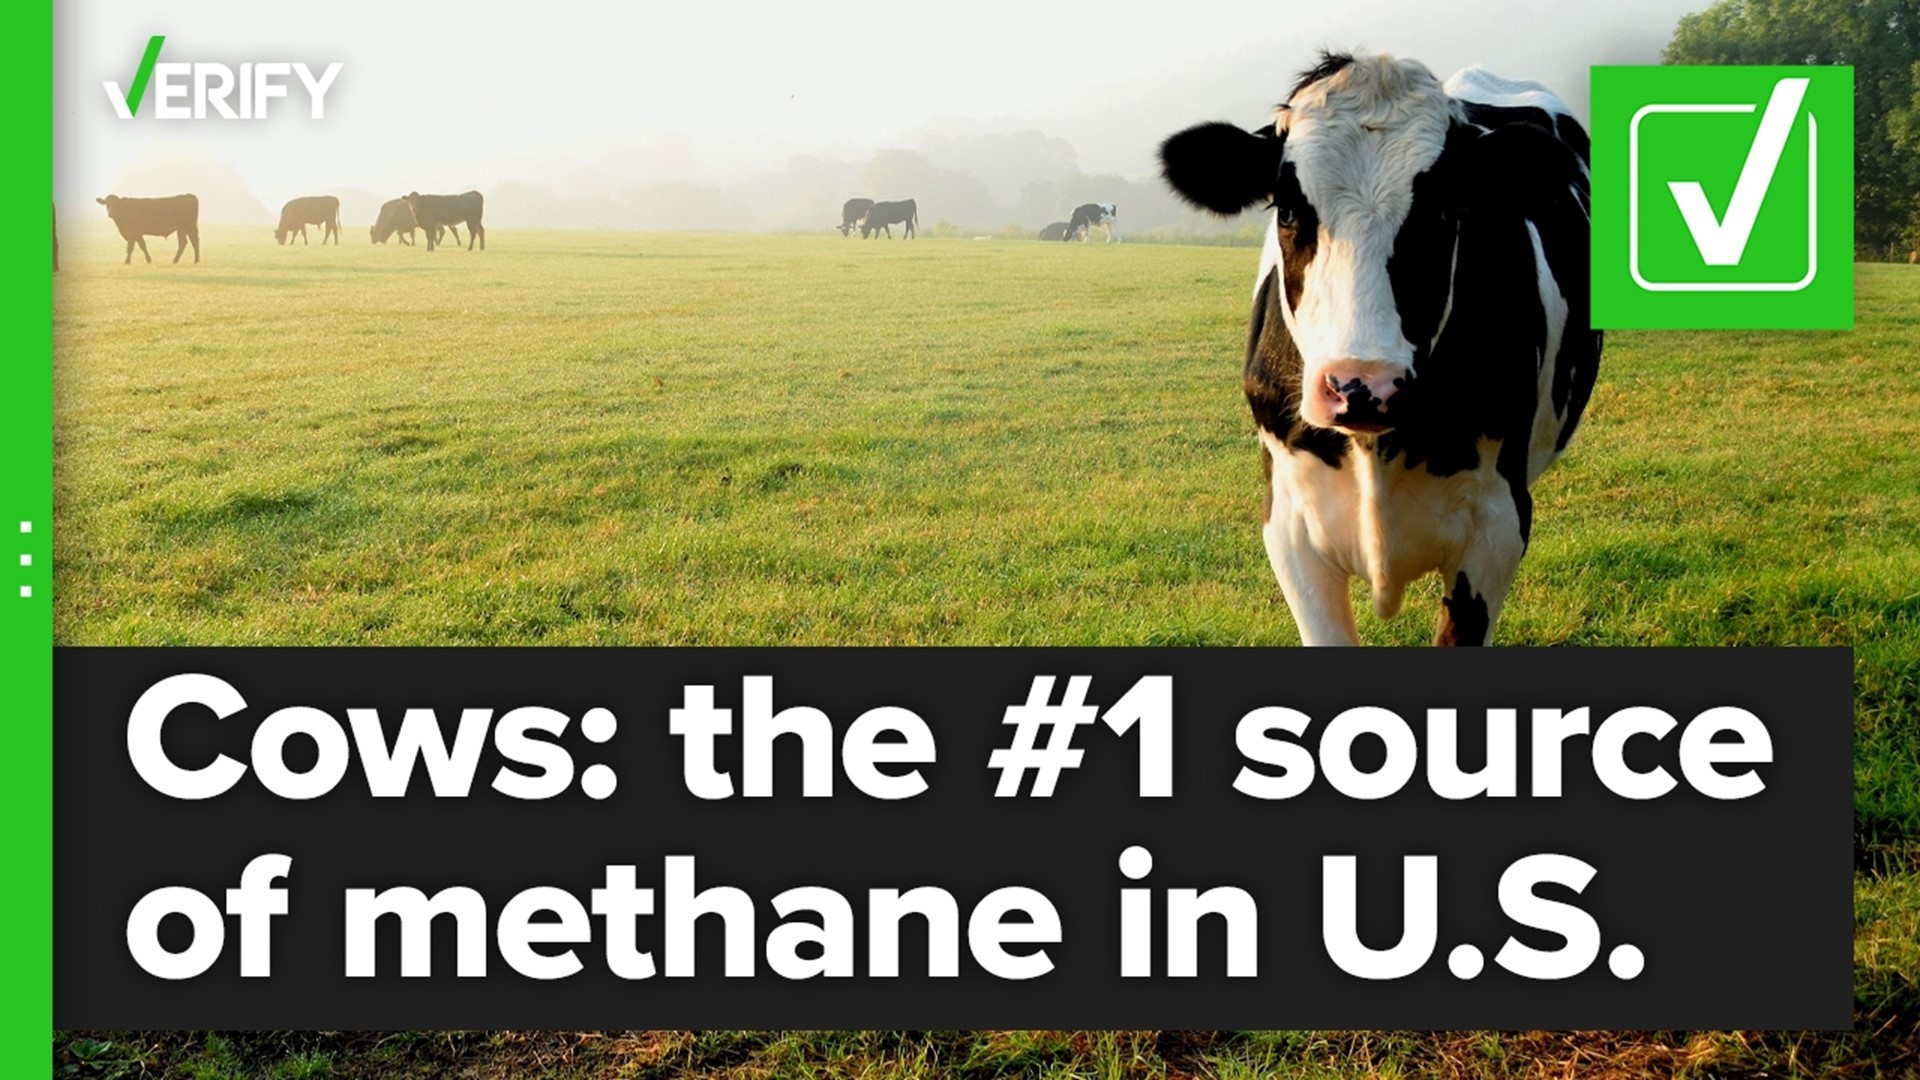 Yes, cattle are the top source of methane emissions in the US |  